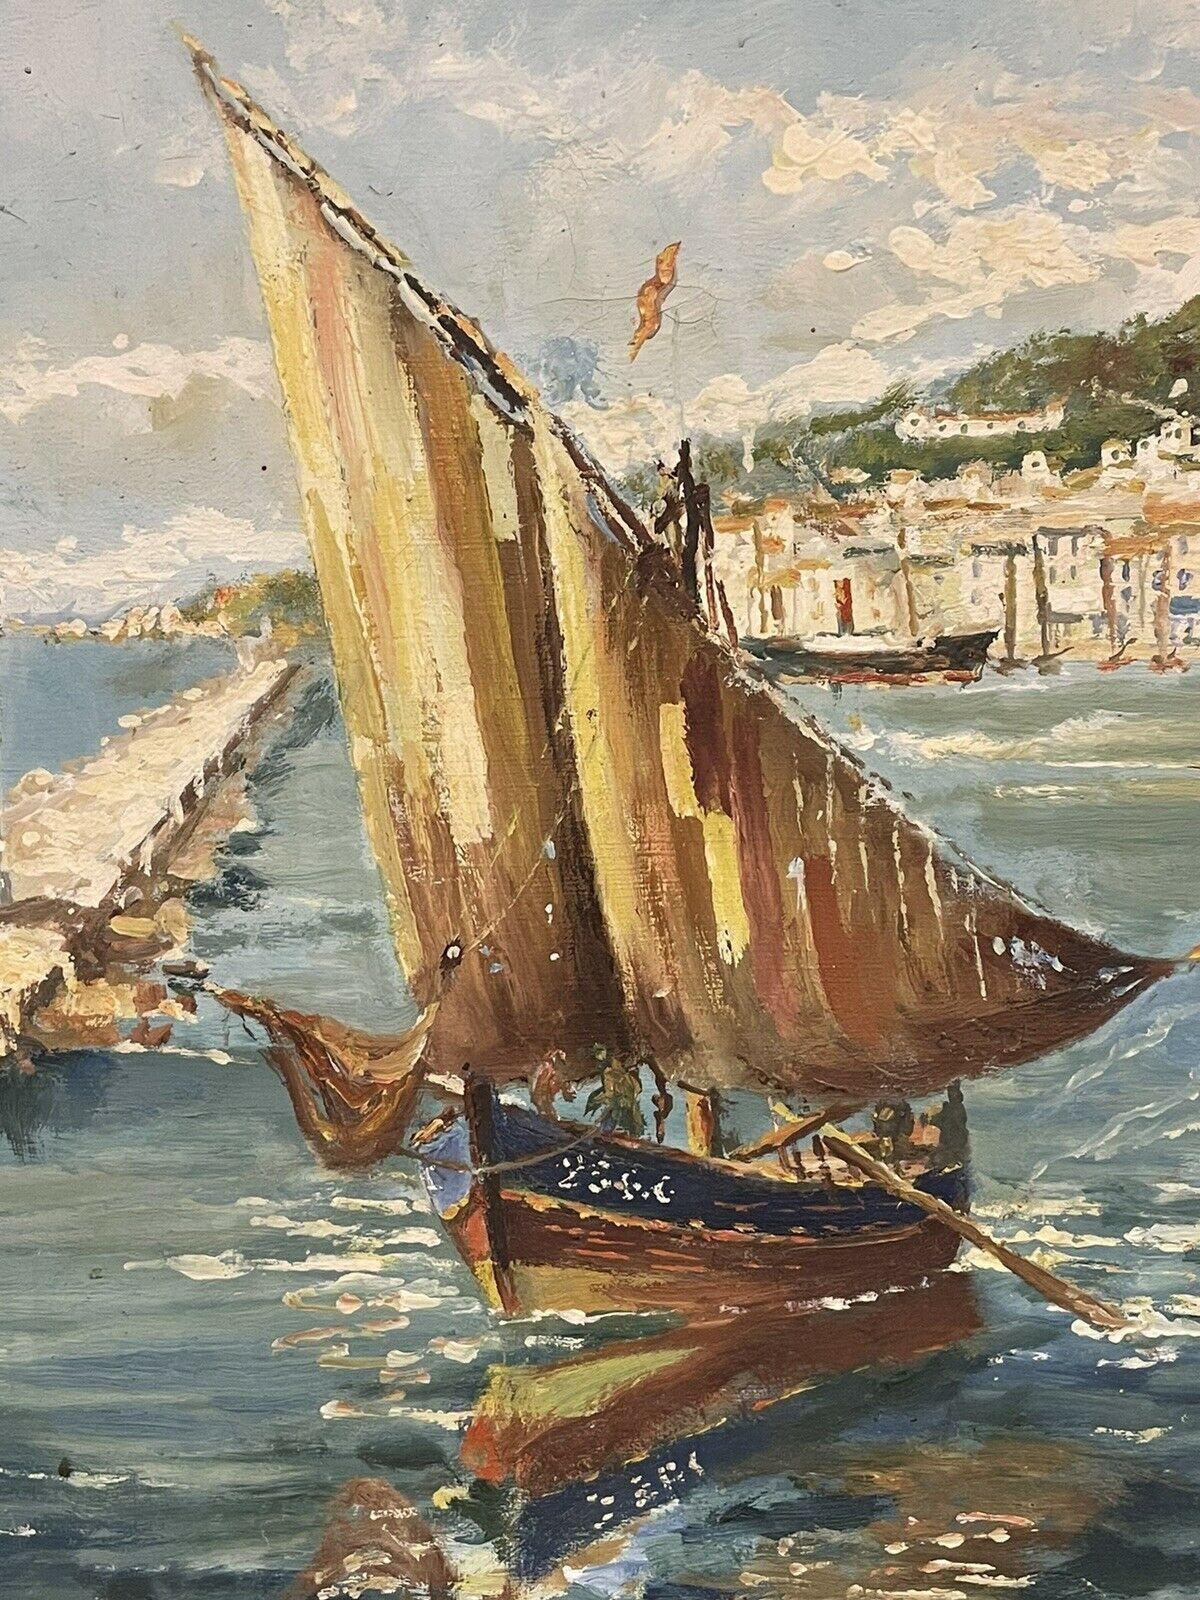 LARGE VINTAGE FRENCH SIGNED OIL - SAILING BOATS ON THE MED FRENCH RIVIERA COAST - Impressionist Painting by Jason Bentham Dinsdale